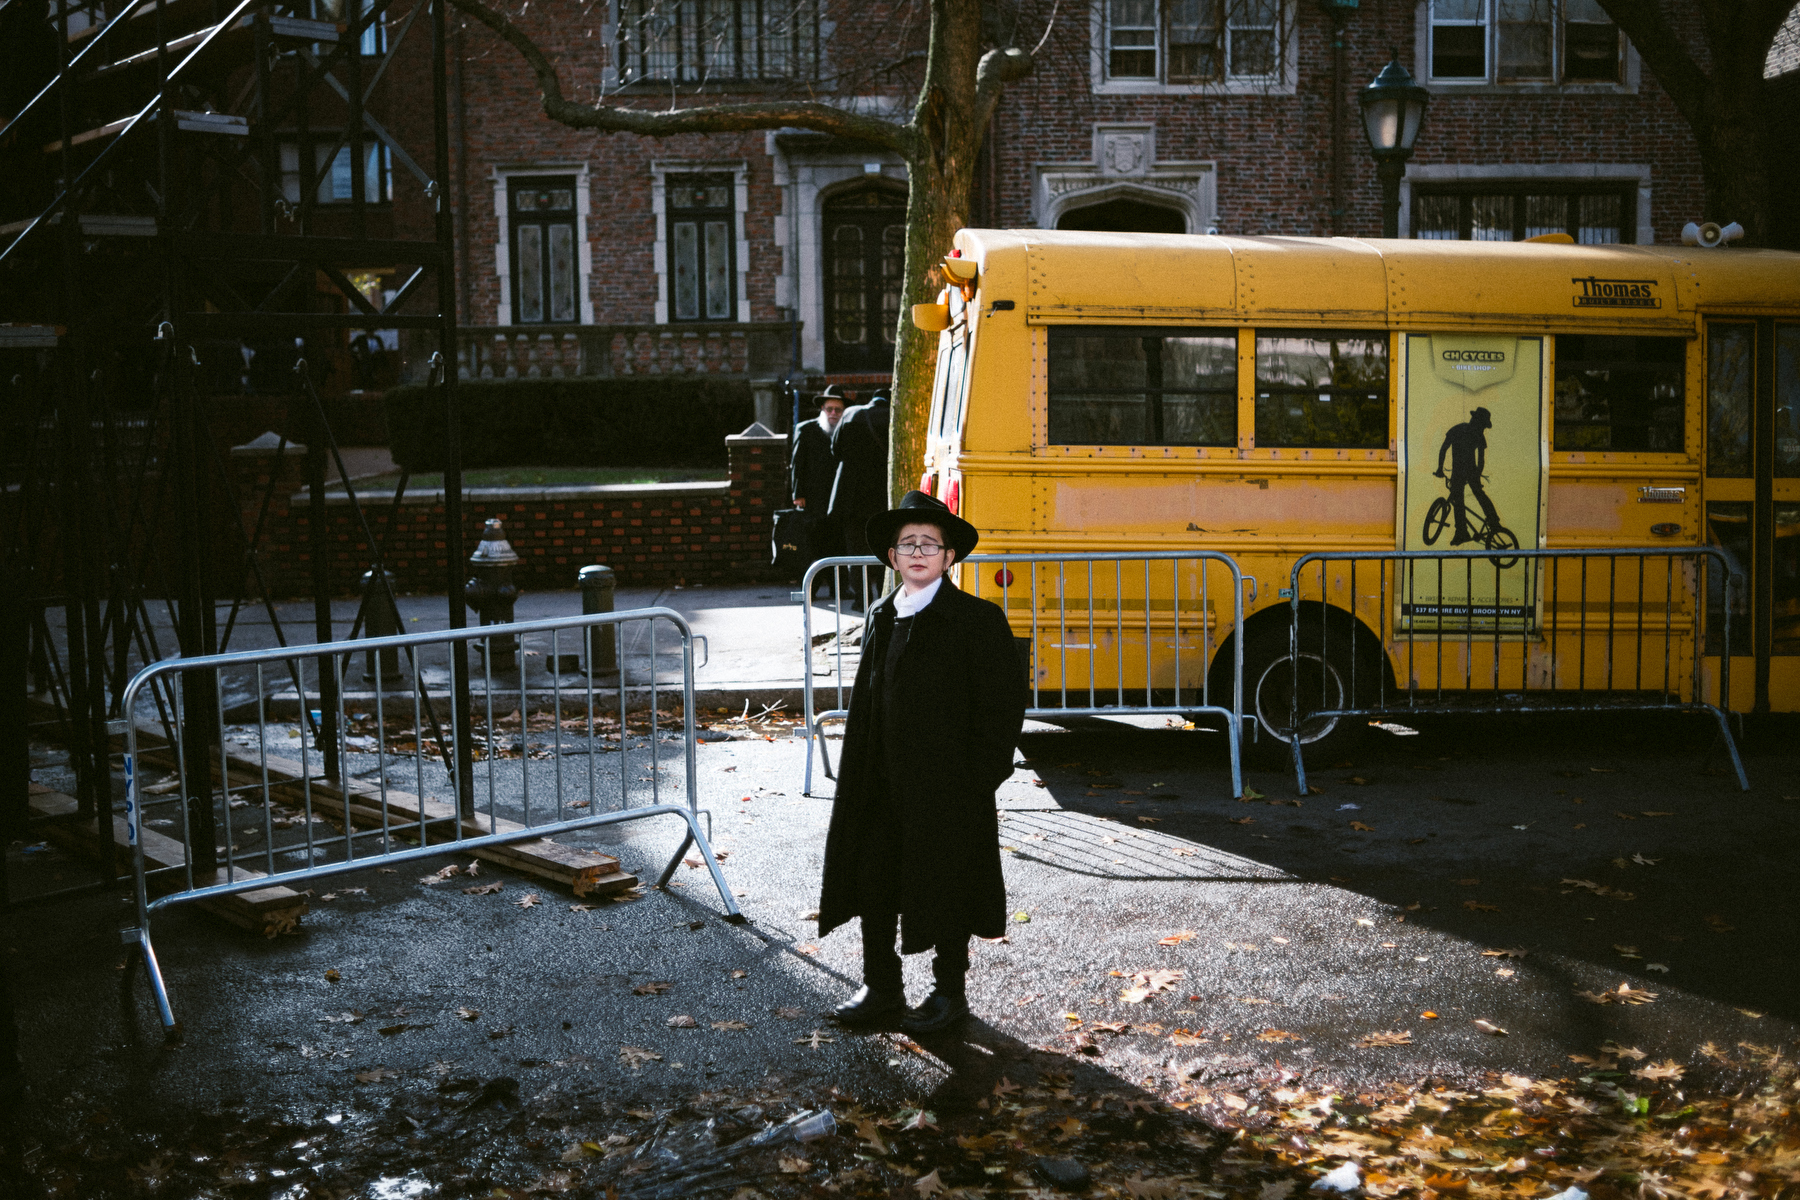  A young Chabad-Lubavitch boy, stands near a school bus after watching the a group photo of thousands in front of the movement's headquarters in the Crown Heights neighborhood of Brooklyn, NY. 